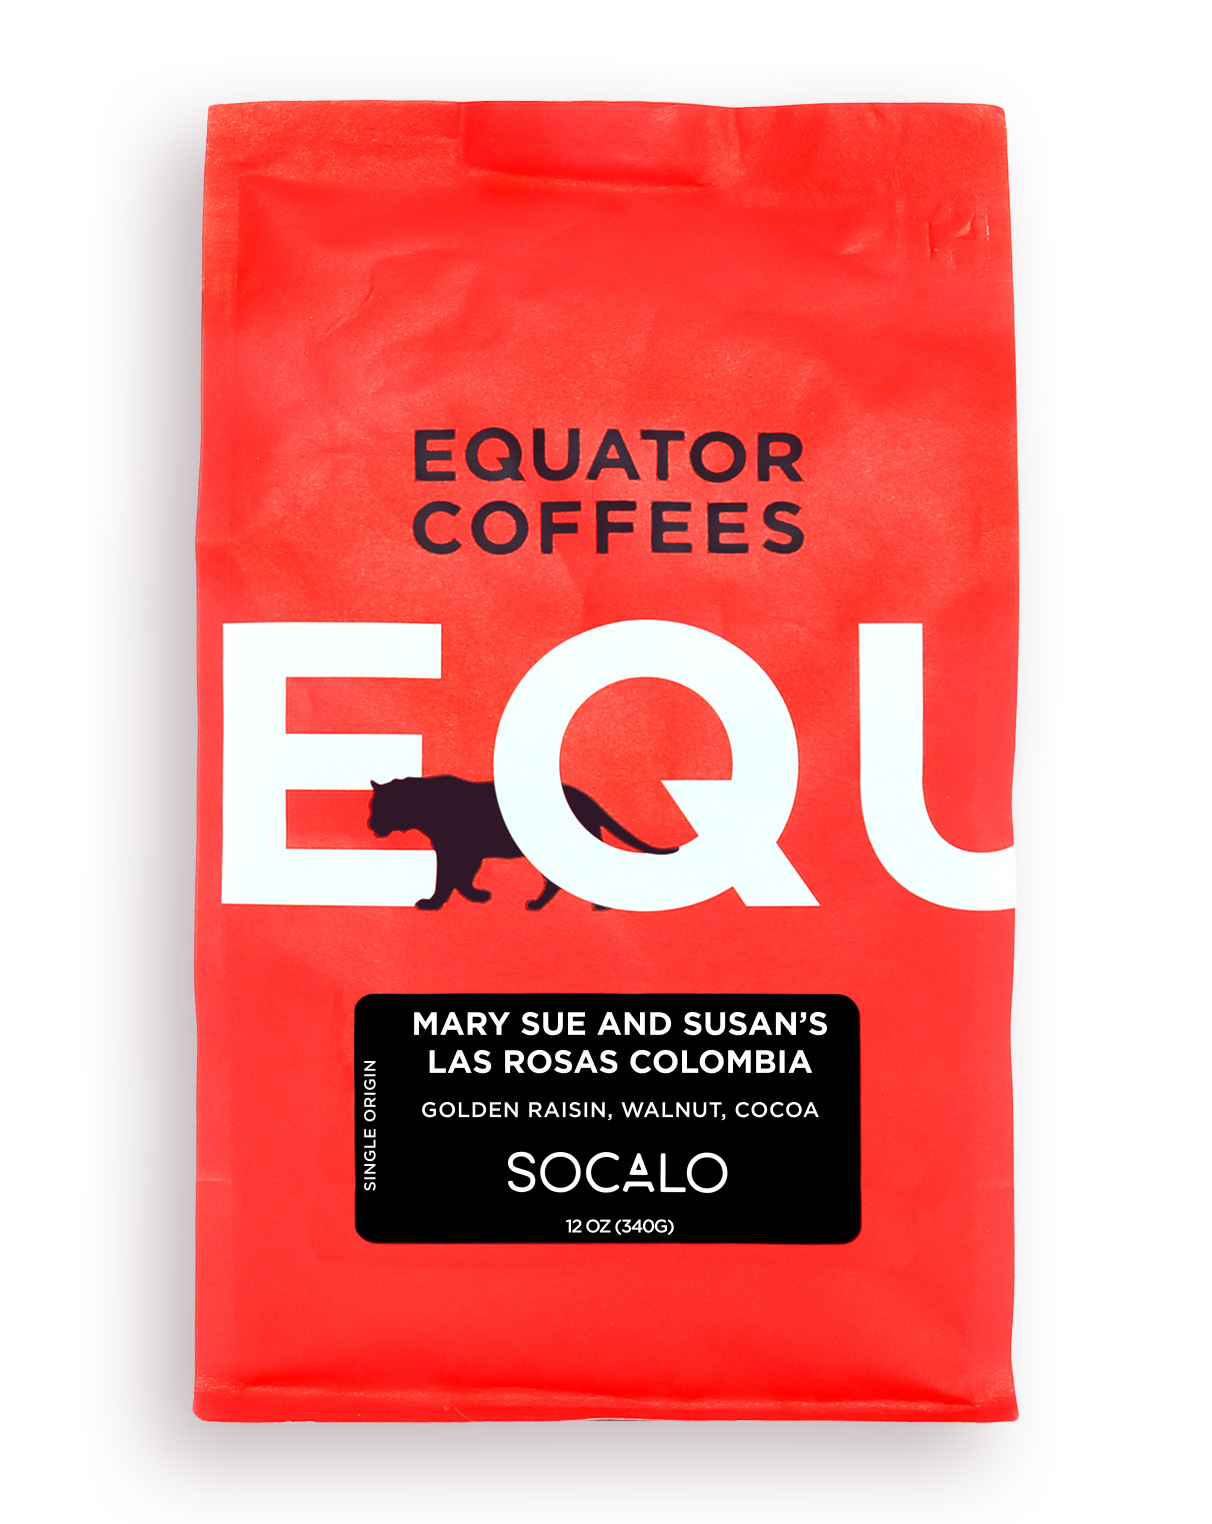 Equator Coffees package of coffee